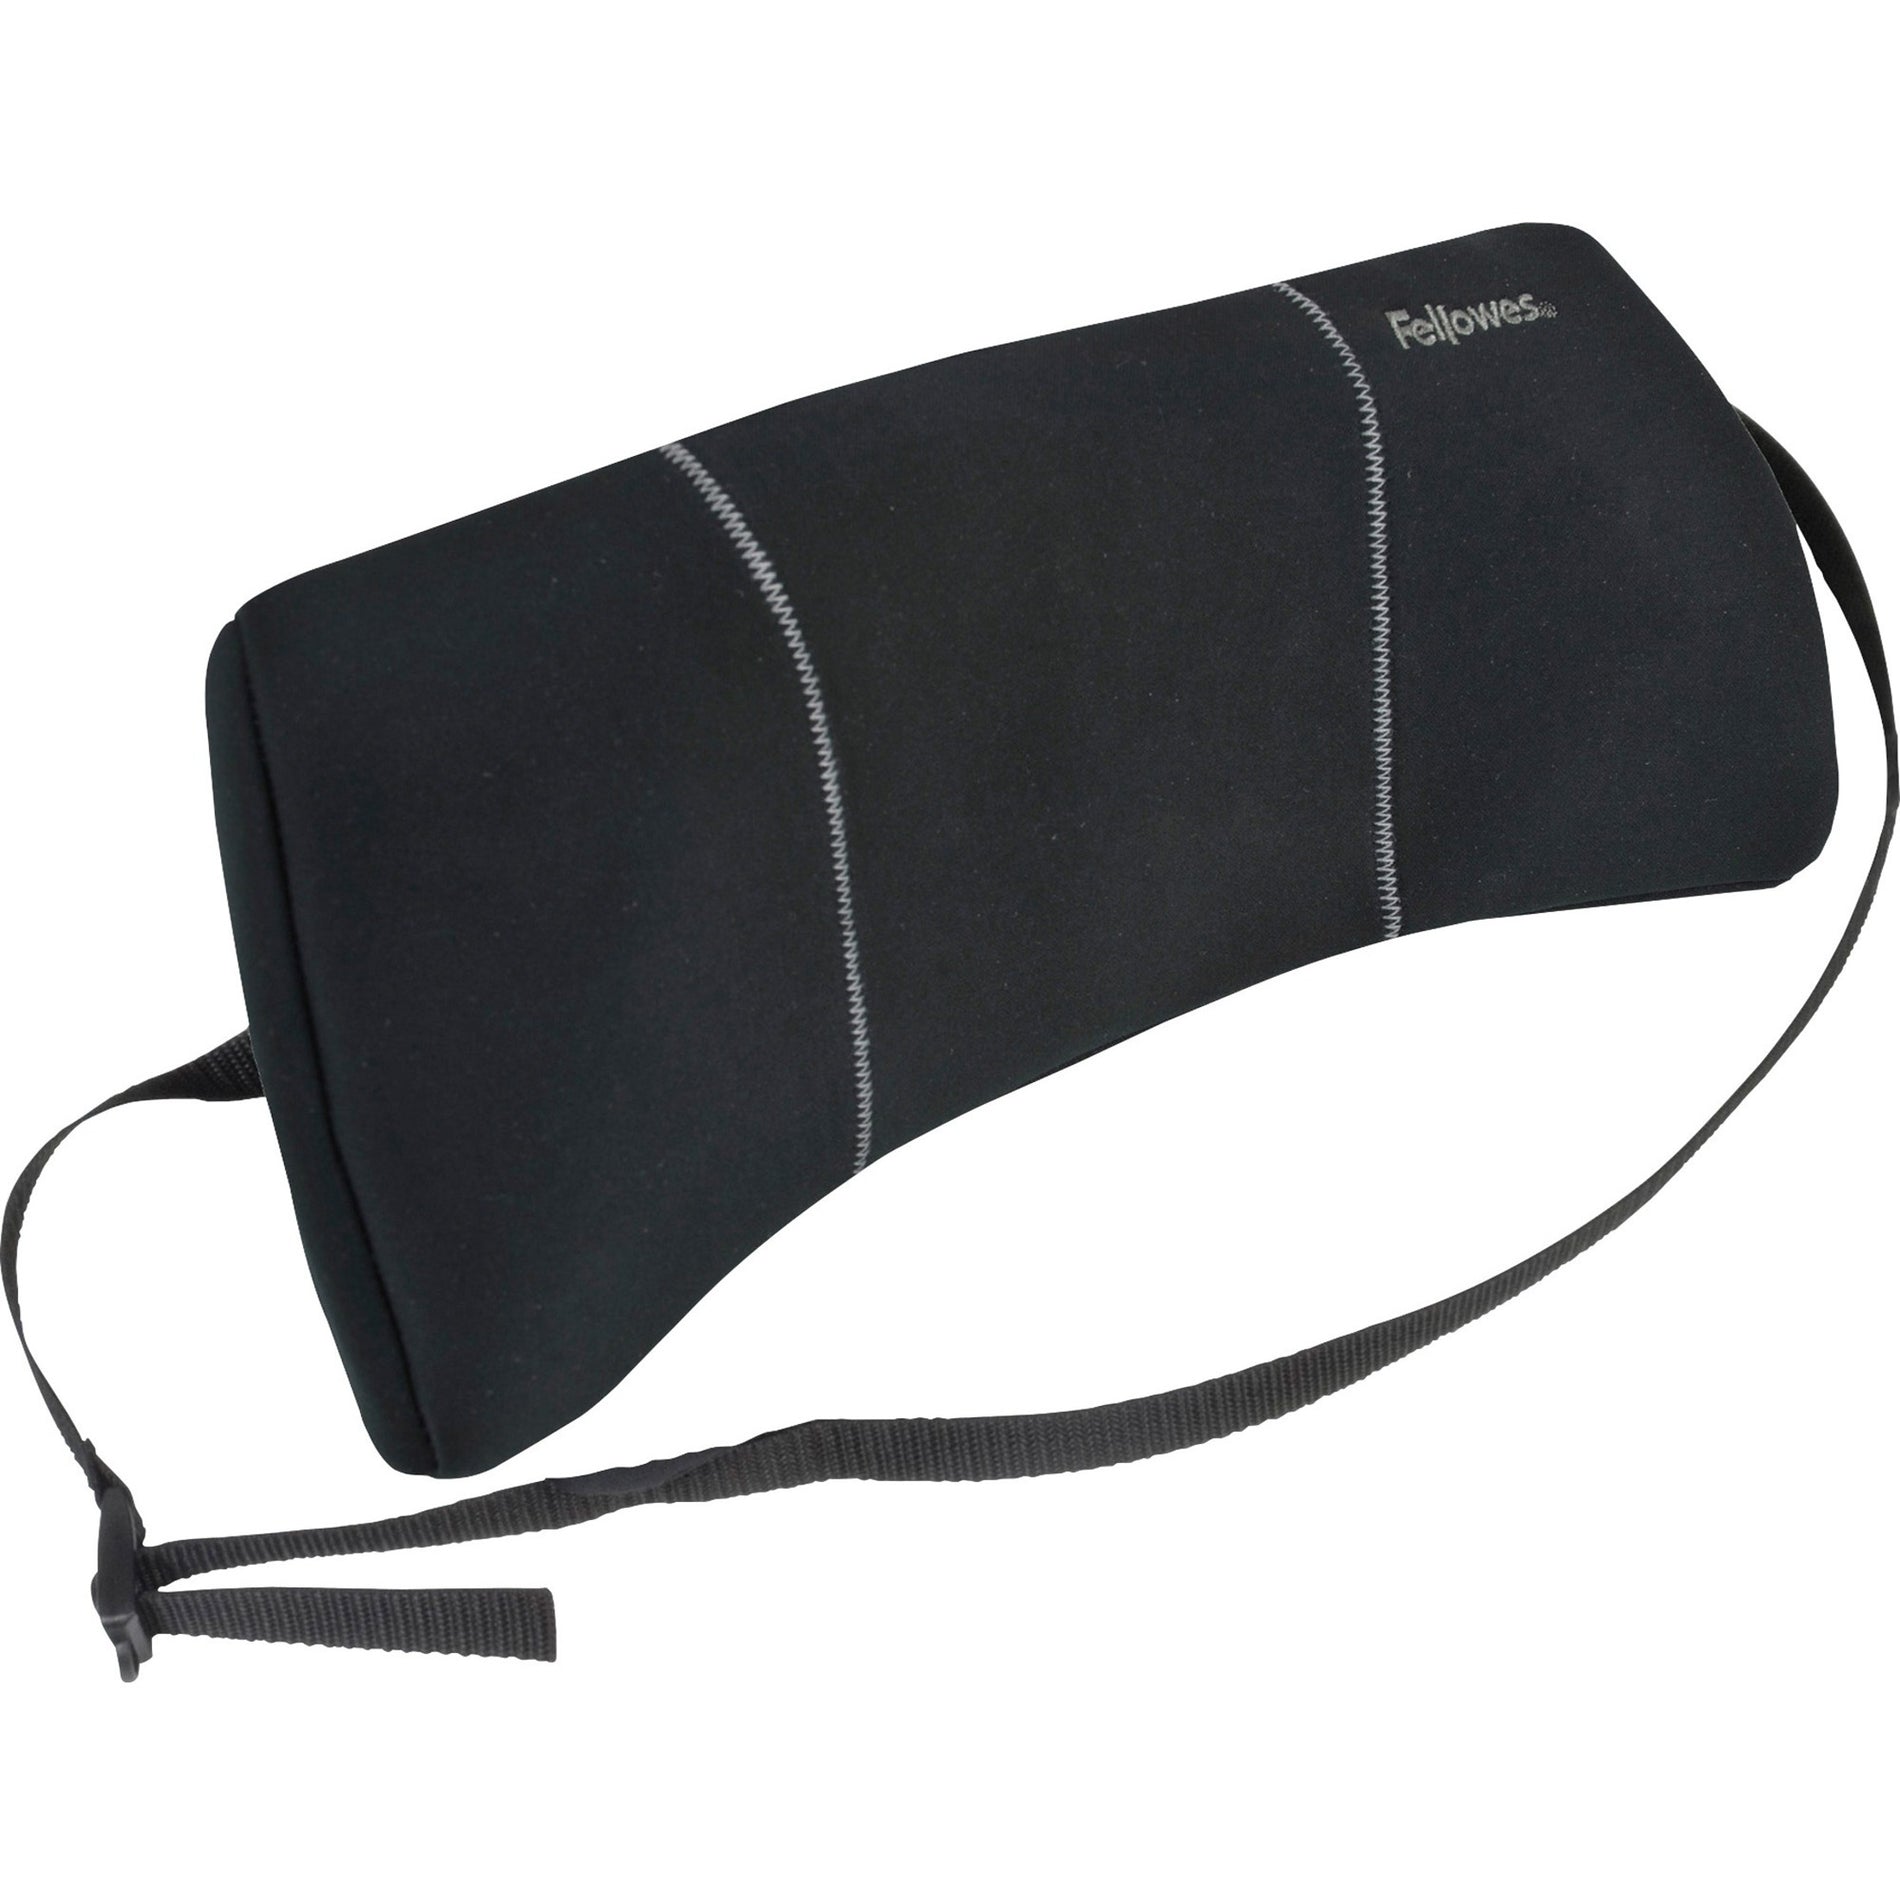 Fellowes 9190701 Lumbar Back Support, Low Profile Design, Soft Brushed Cover, Adjustable Strap